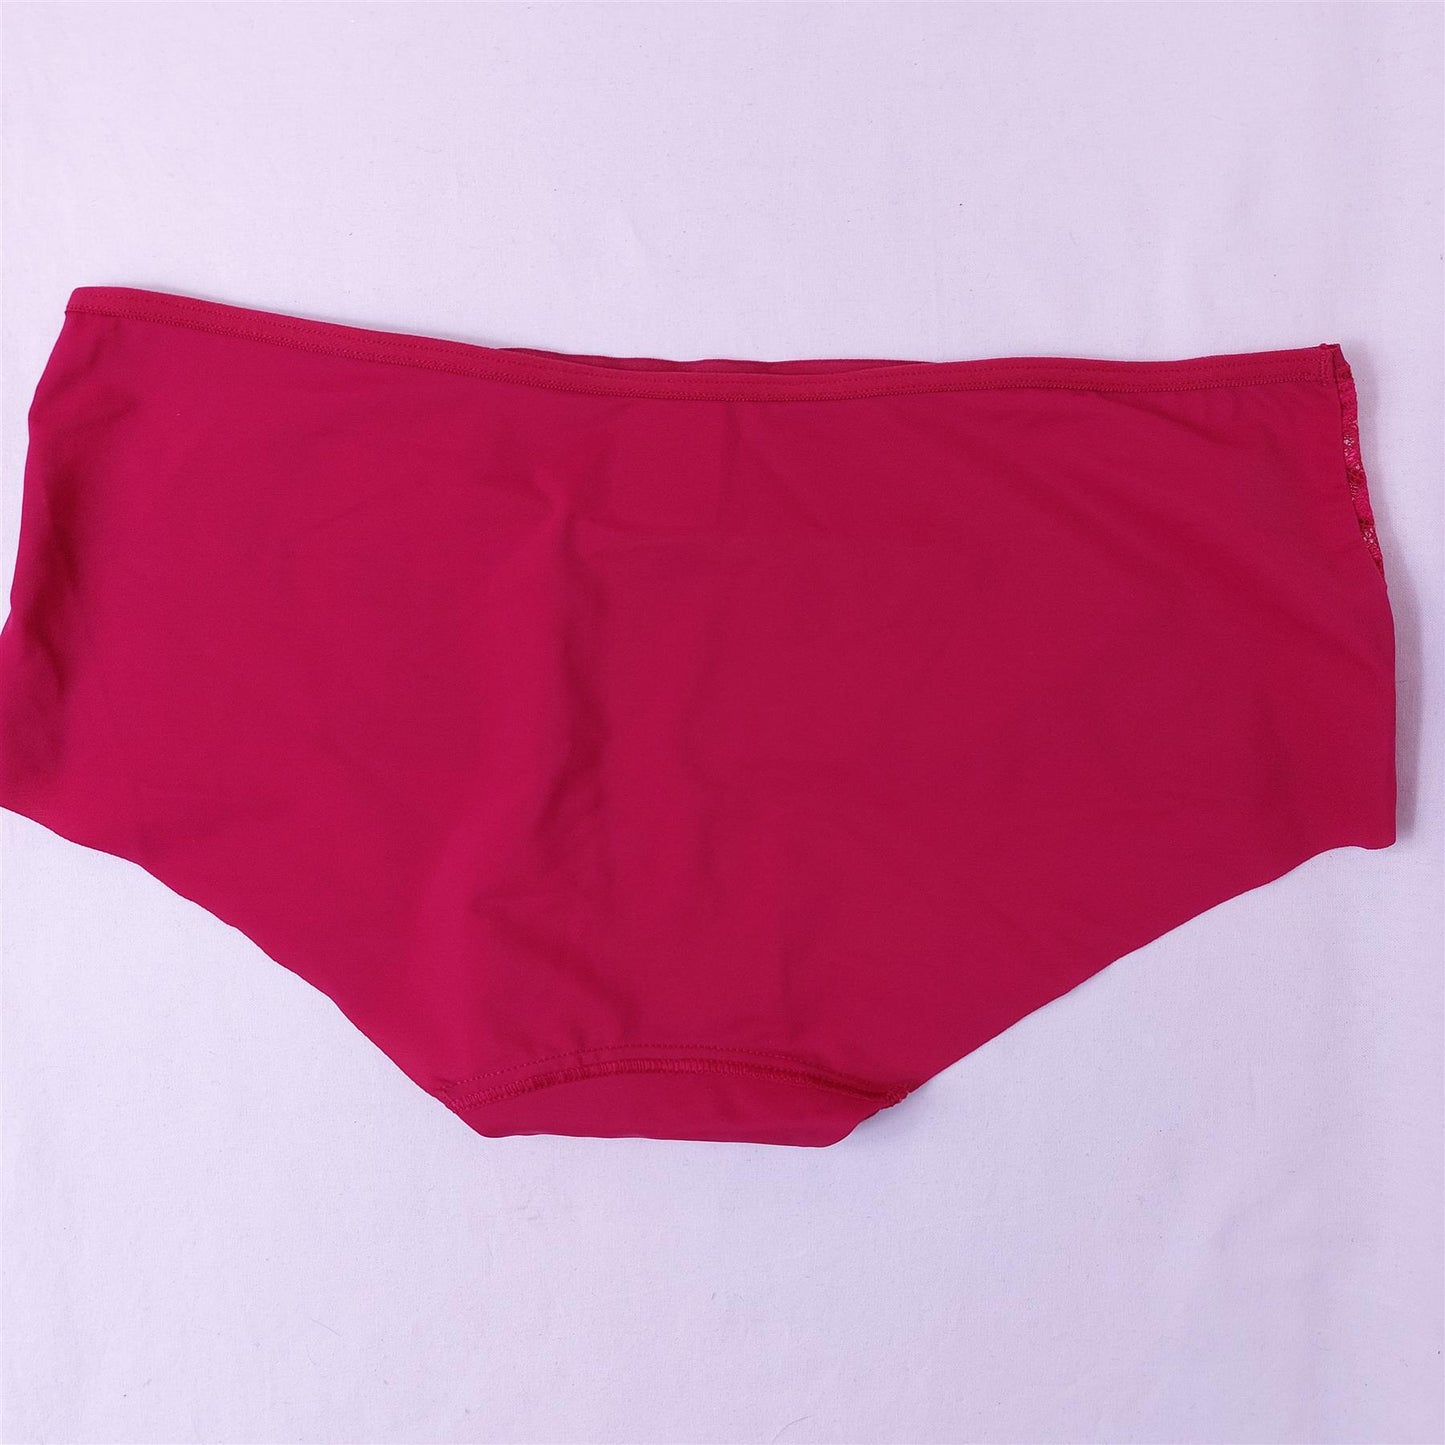 No VPL Curve Smooth Lines Low Brief Knickers 3x Pairs